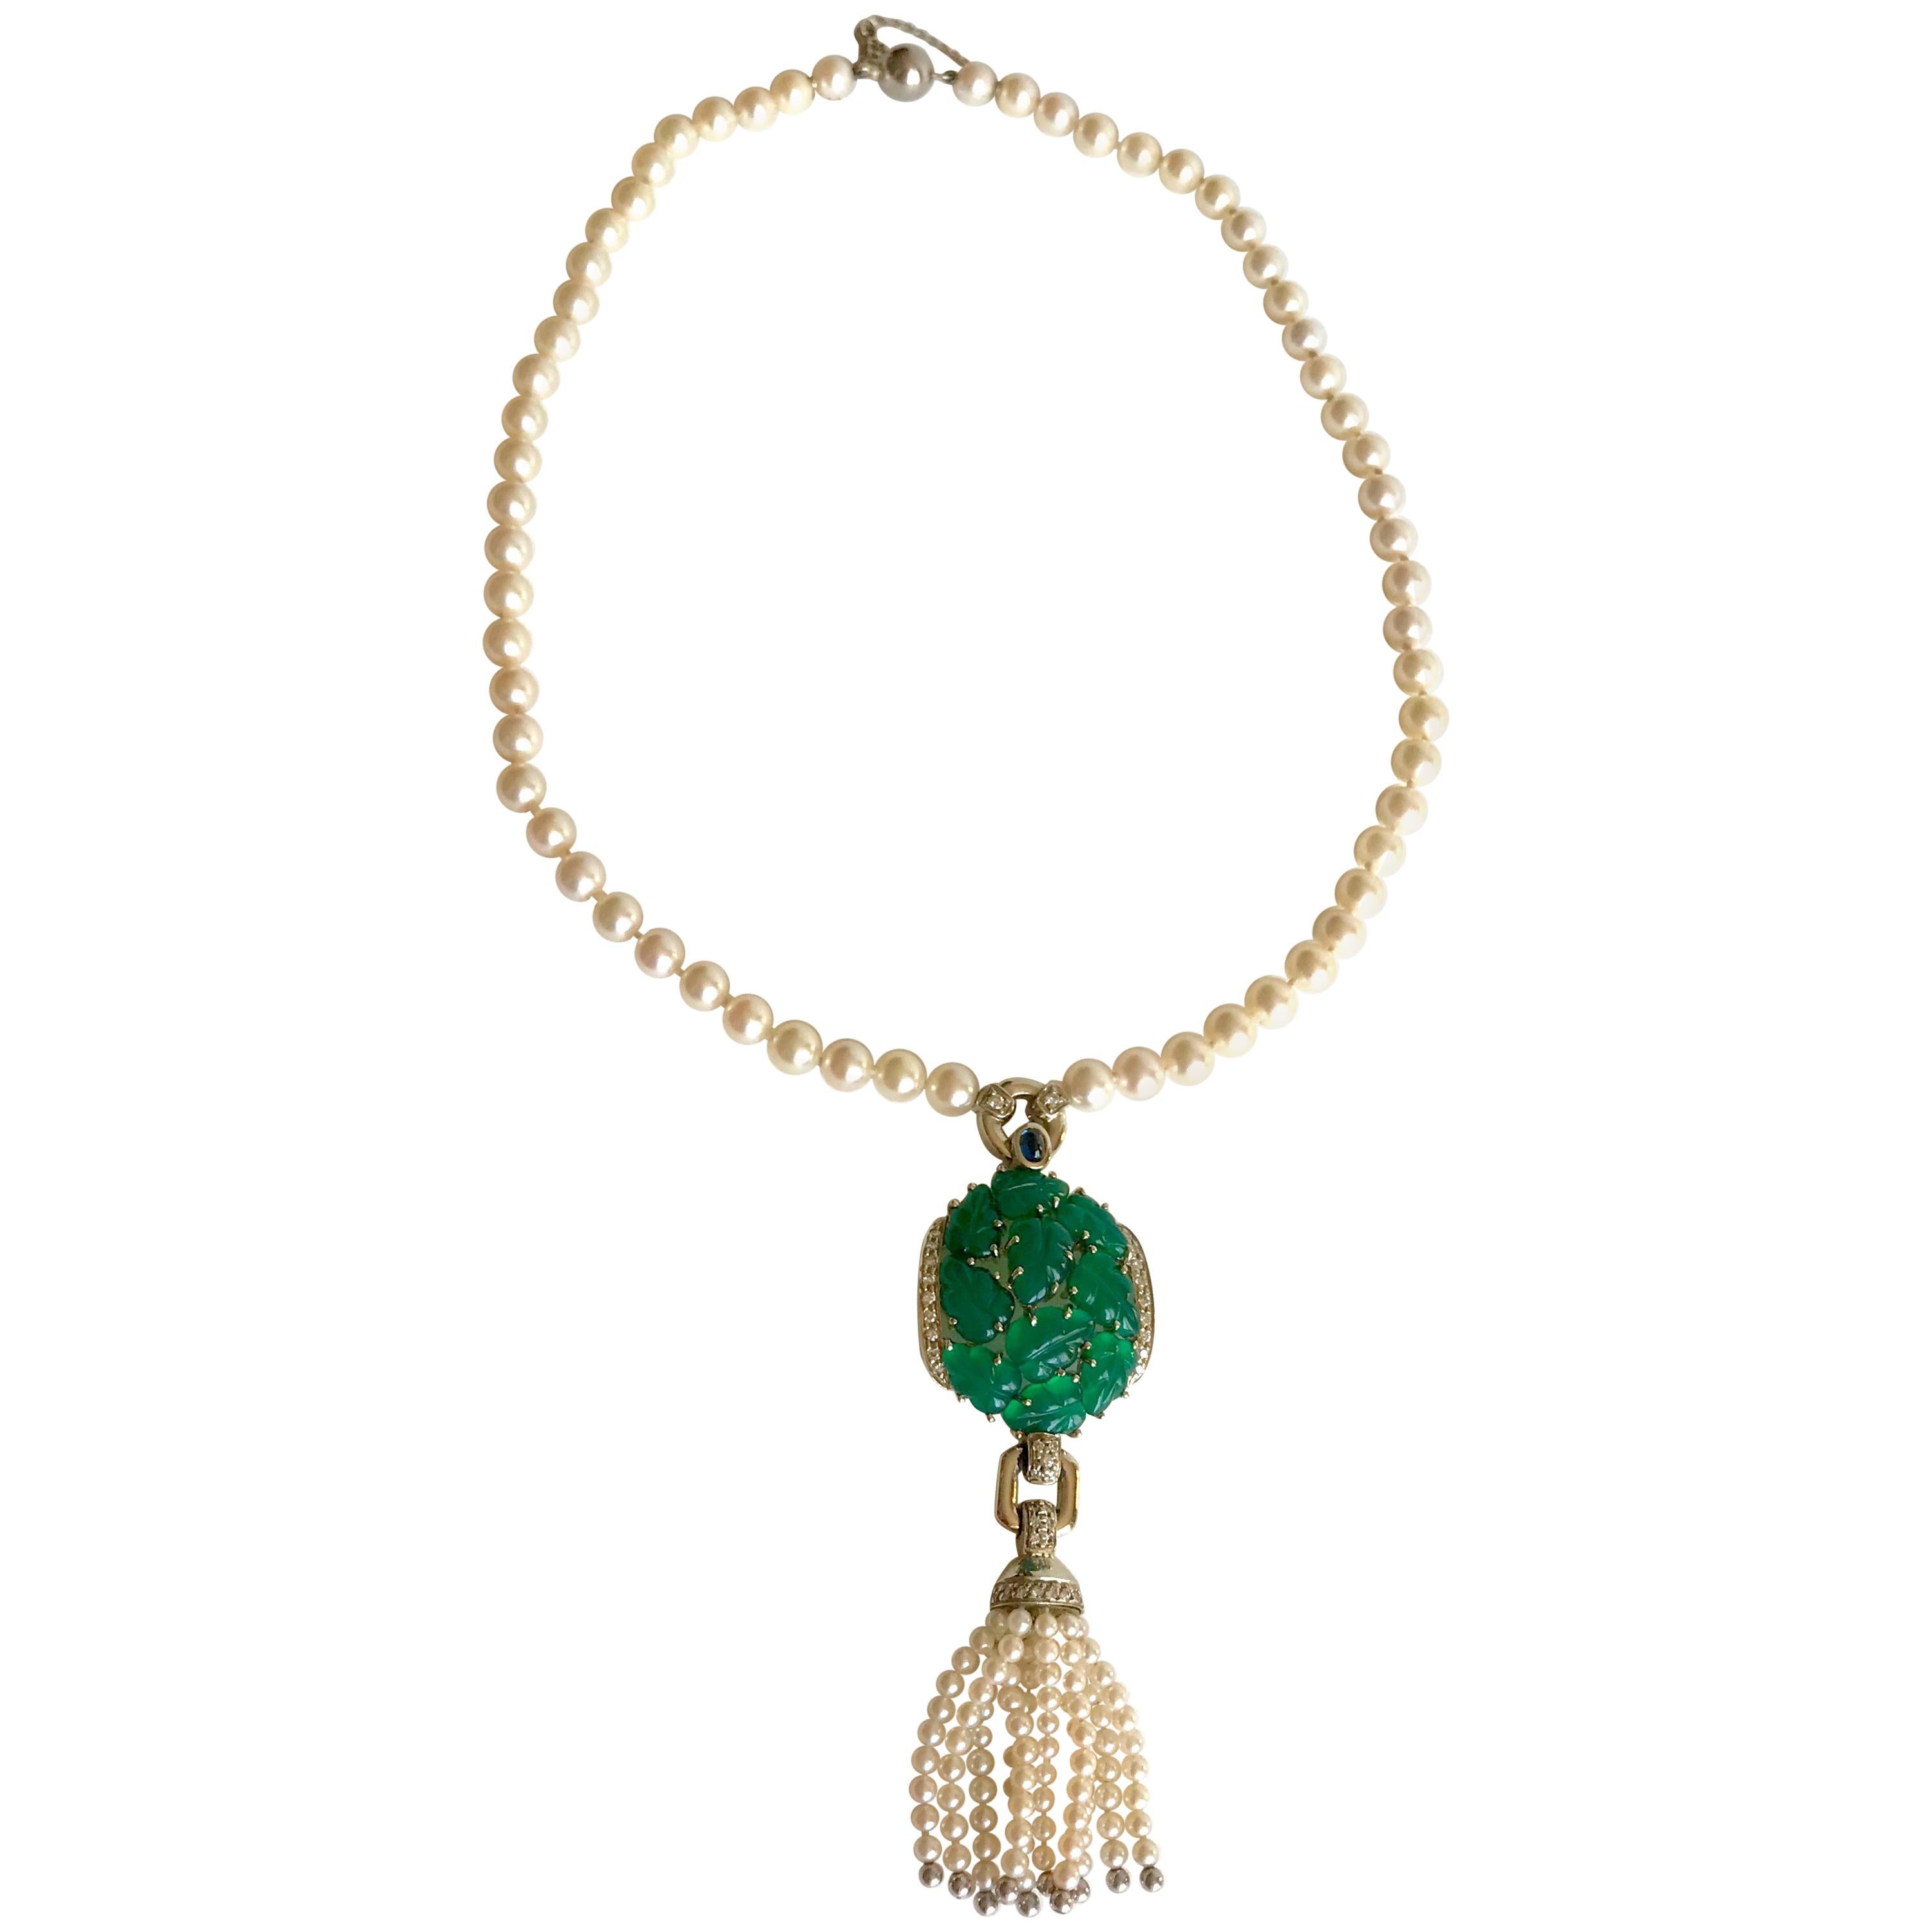 Cartier Necklace in Pearls and Chrysoprases